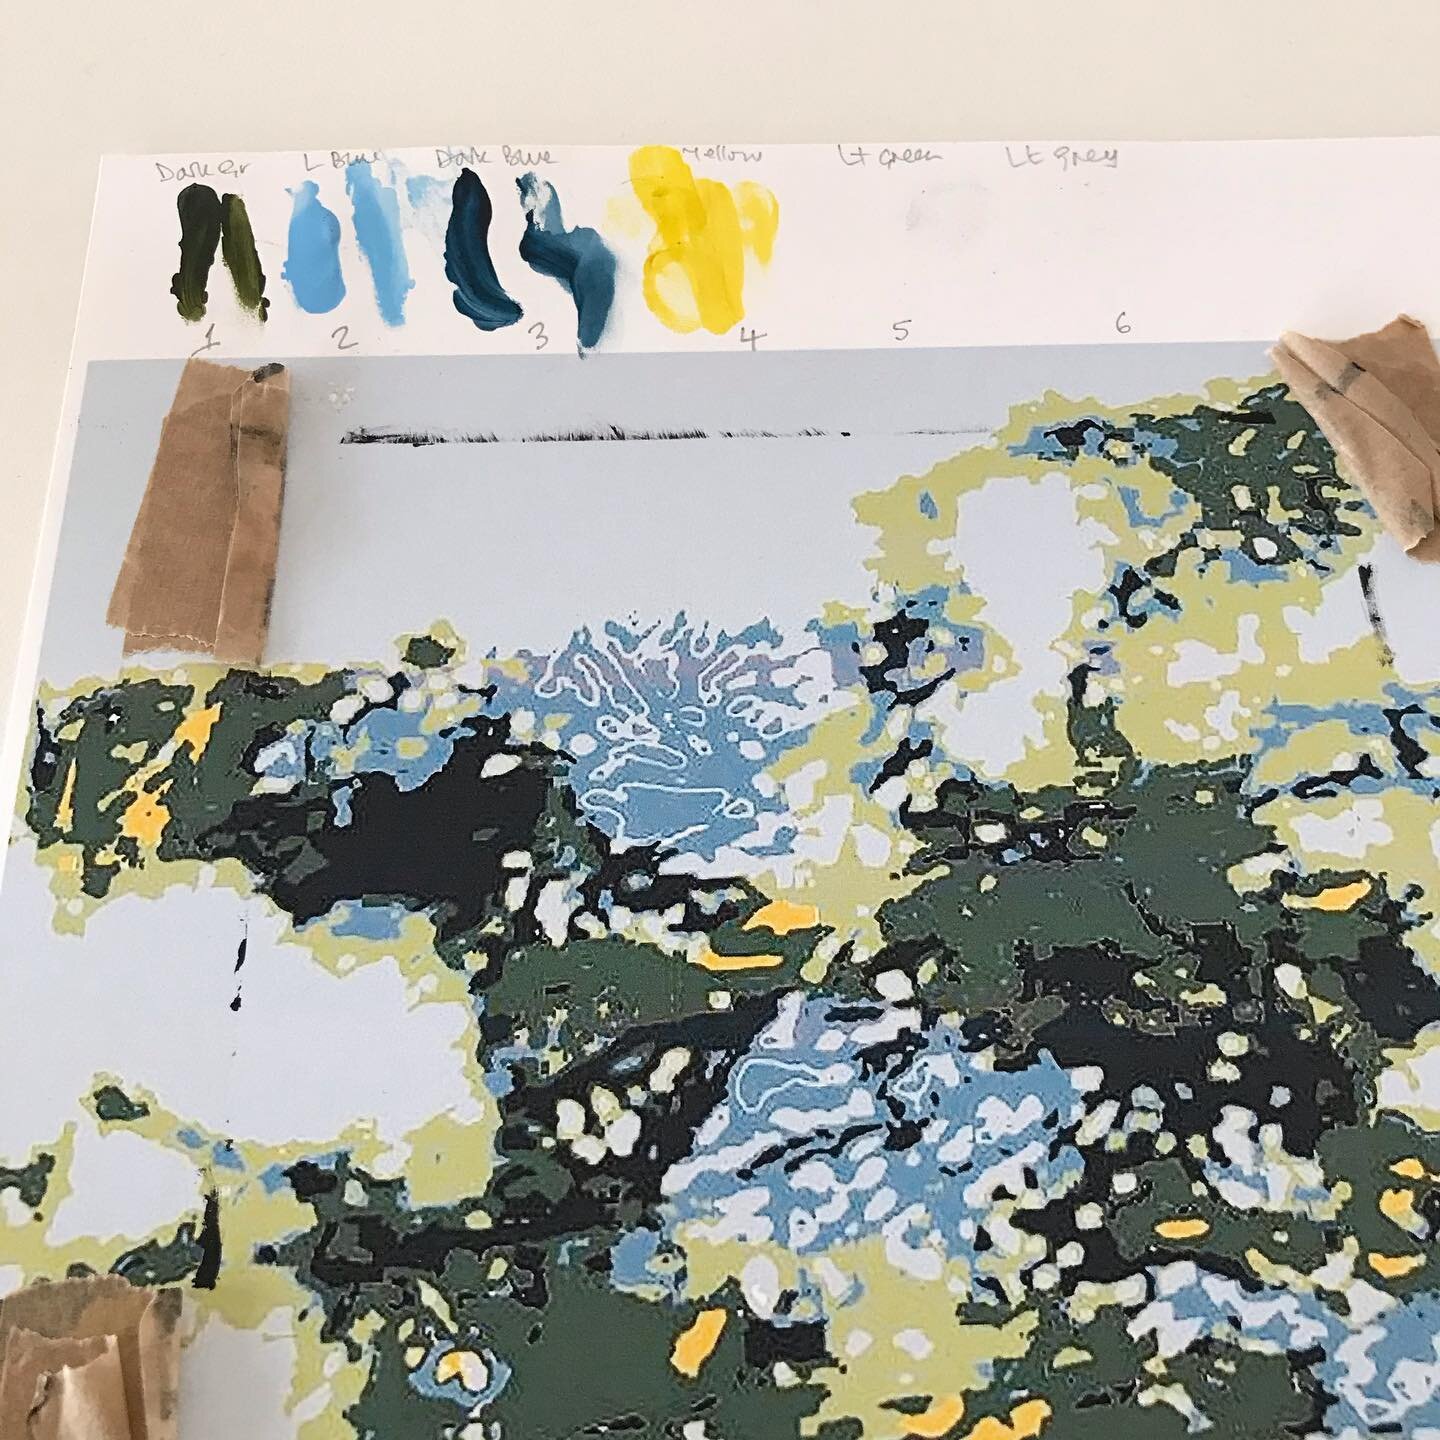 Some new screenprint beginnings - lovely to try things out. 
.
. 
#Playingwithcolour #floodhouse_sa @floodhouse_sa #mixingcolour #colour  #contemporaryart #contemporarysouthafricanart #makingart #workingwithlight #workingwithshadow #printing #screenp